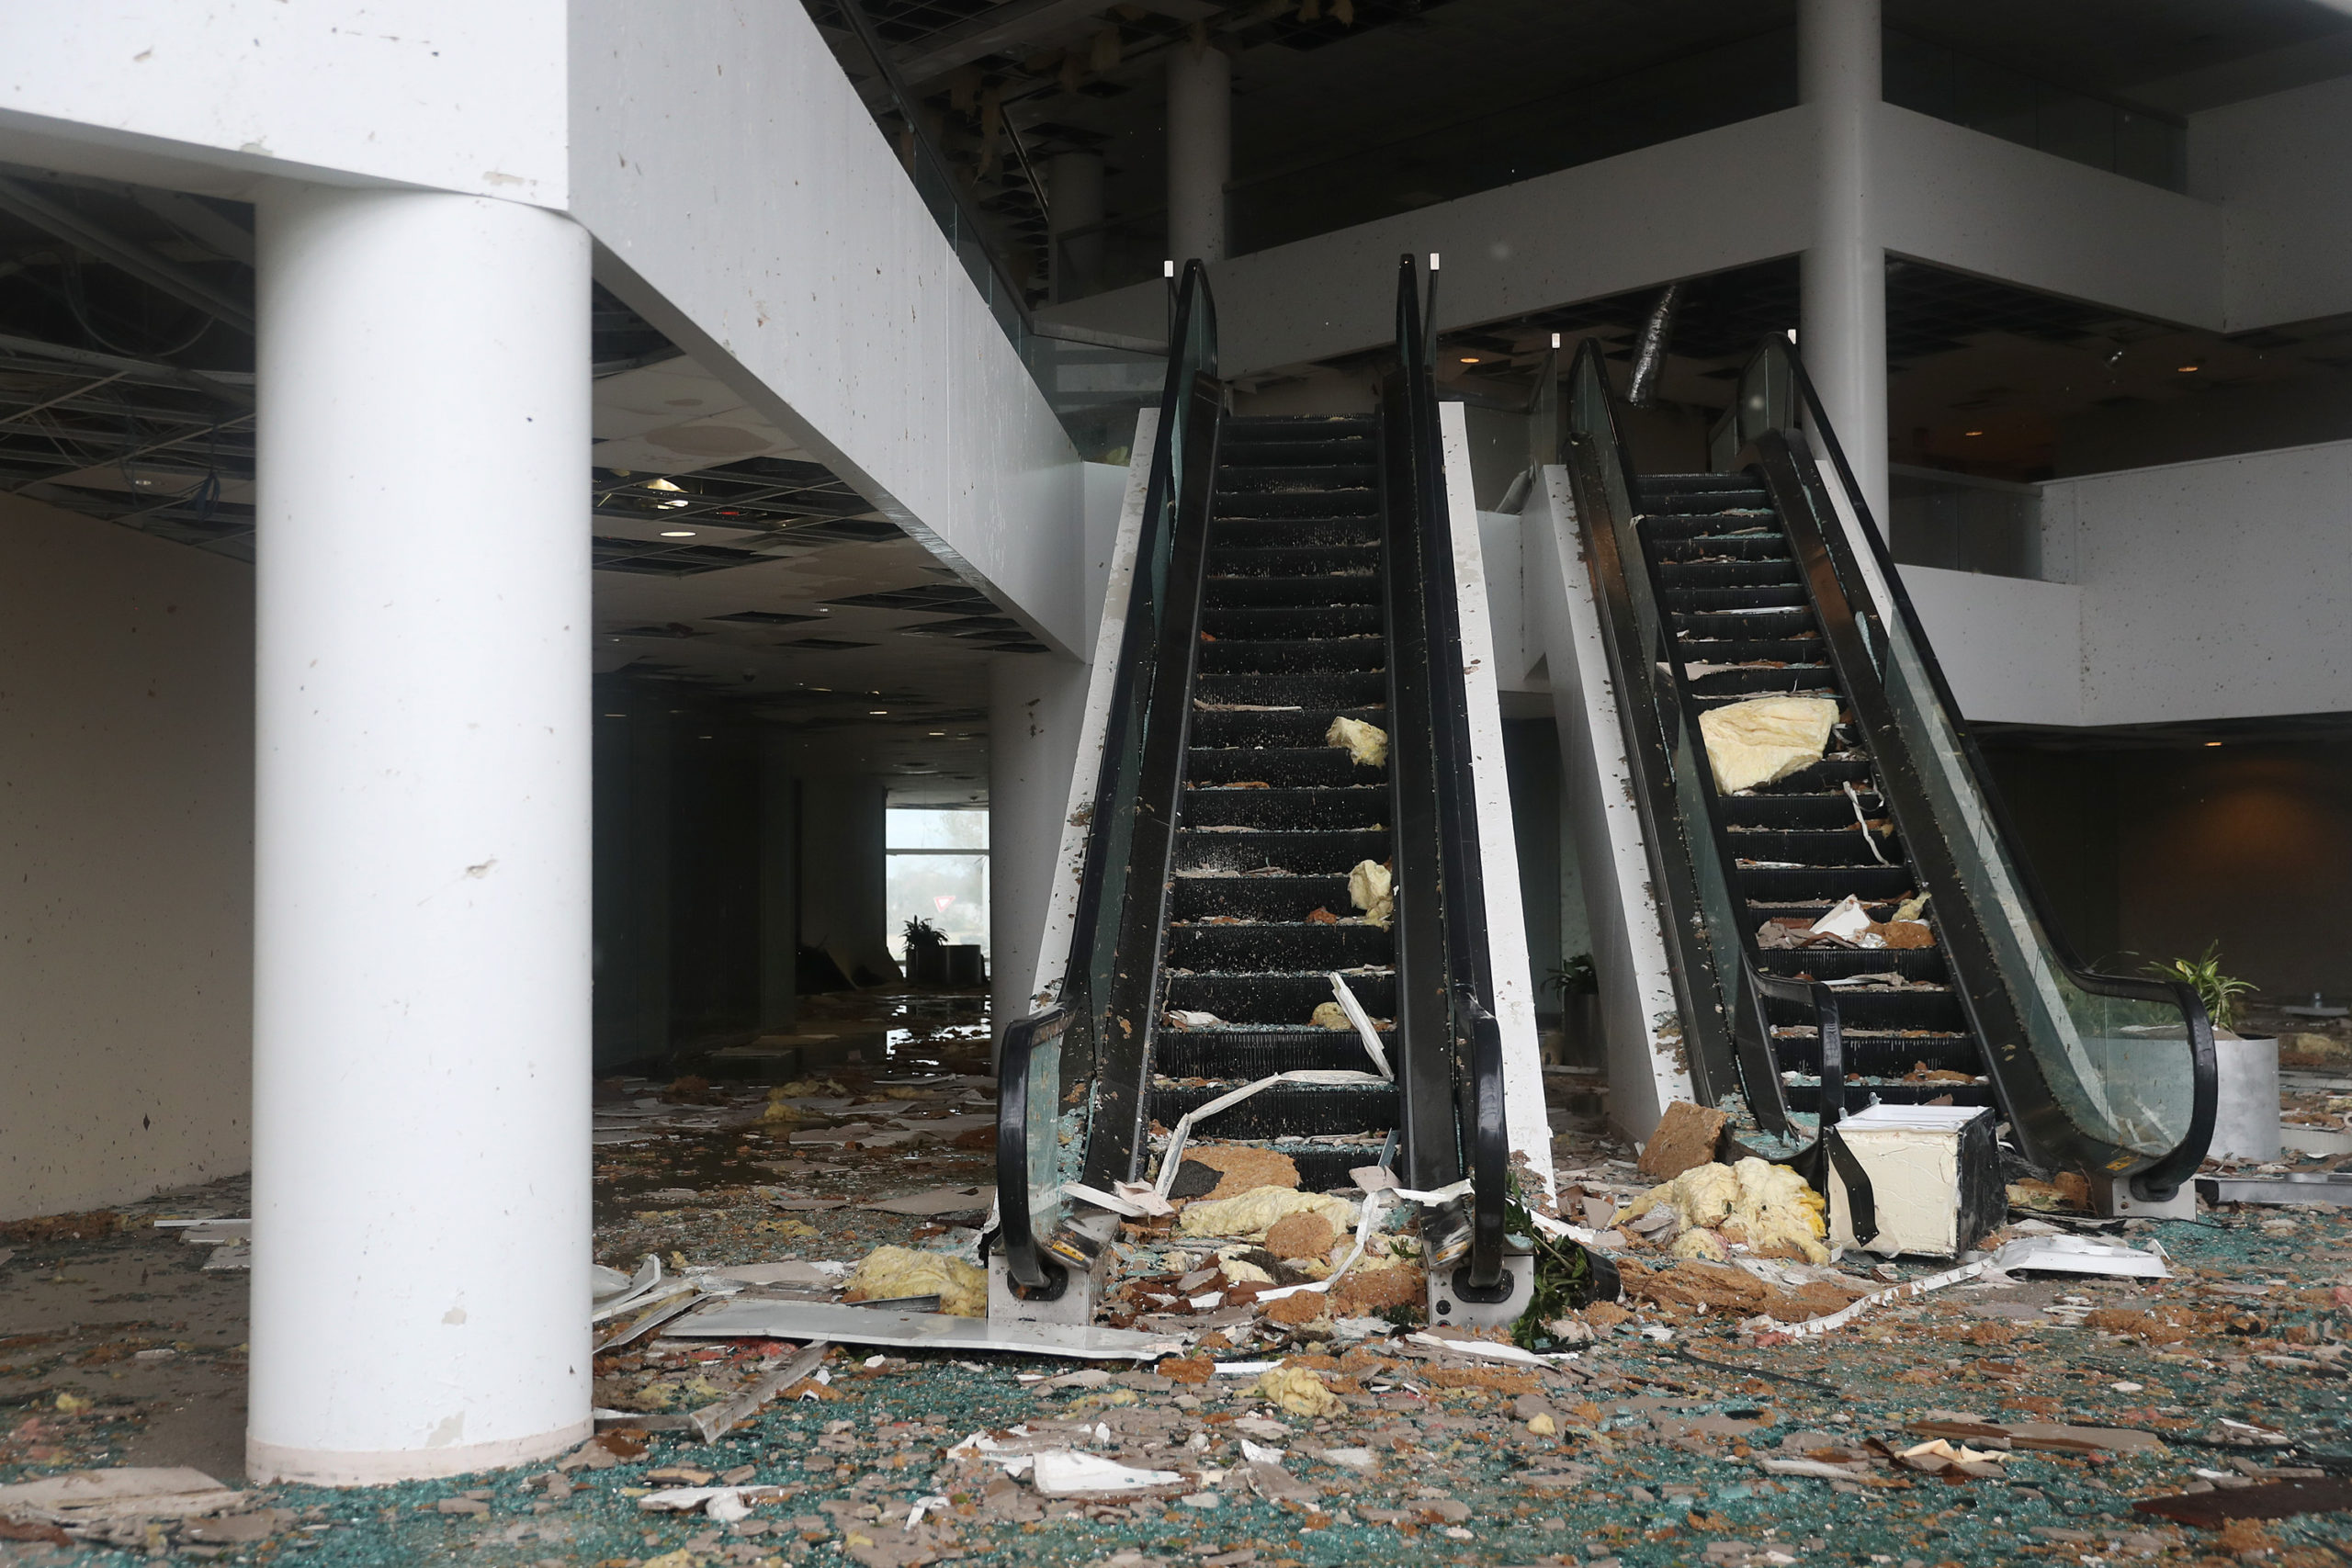 An escalator is seen in Capital One Tower that had its windows blown out in the downtown area after Hurricane Laura passed through on August 27, 2020 in Lake Charles, Louisiana. (Photo: Joe Raedle, Getty Images)